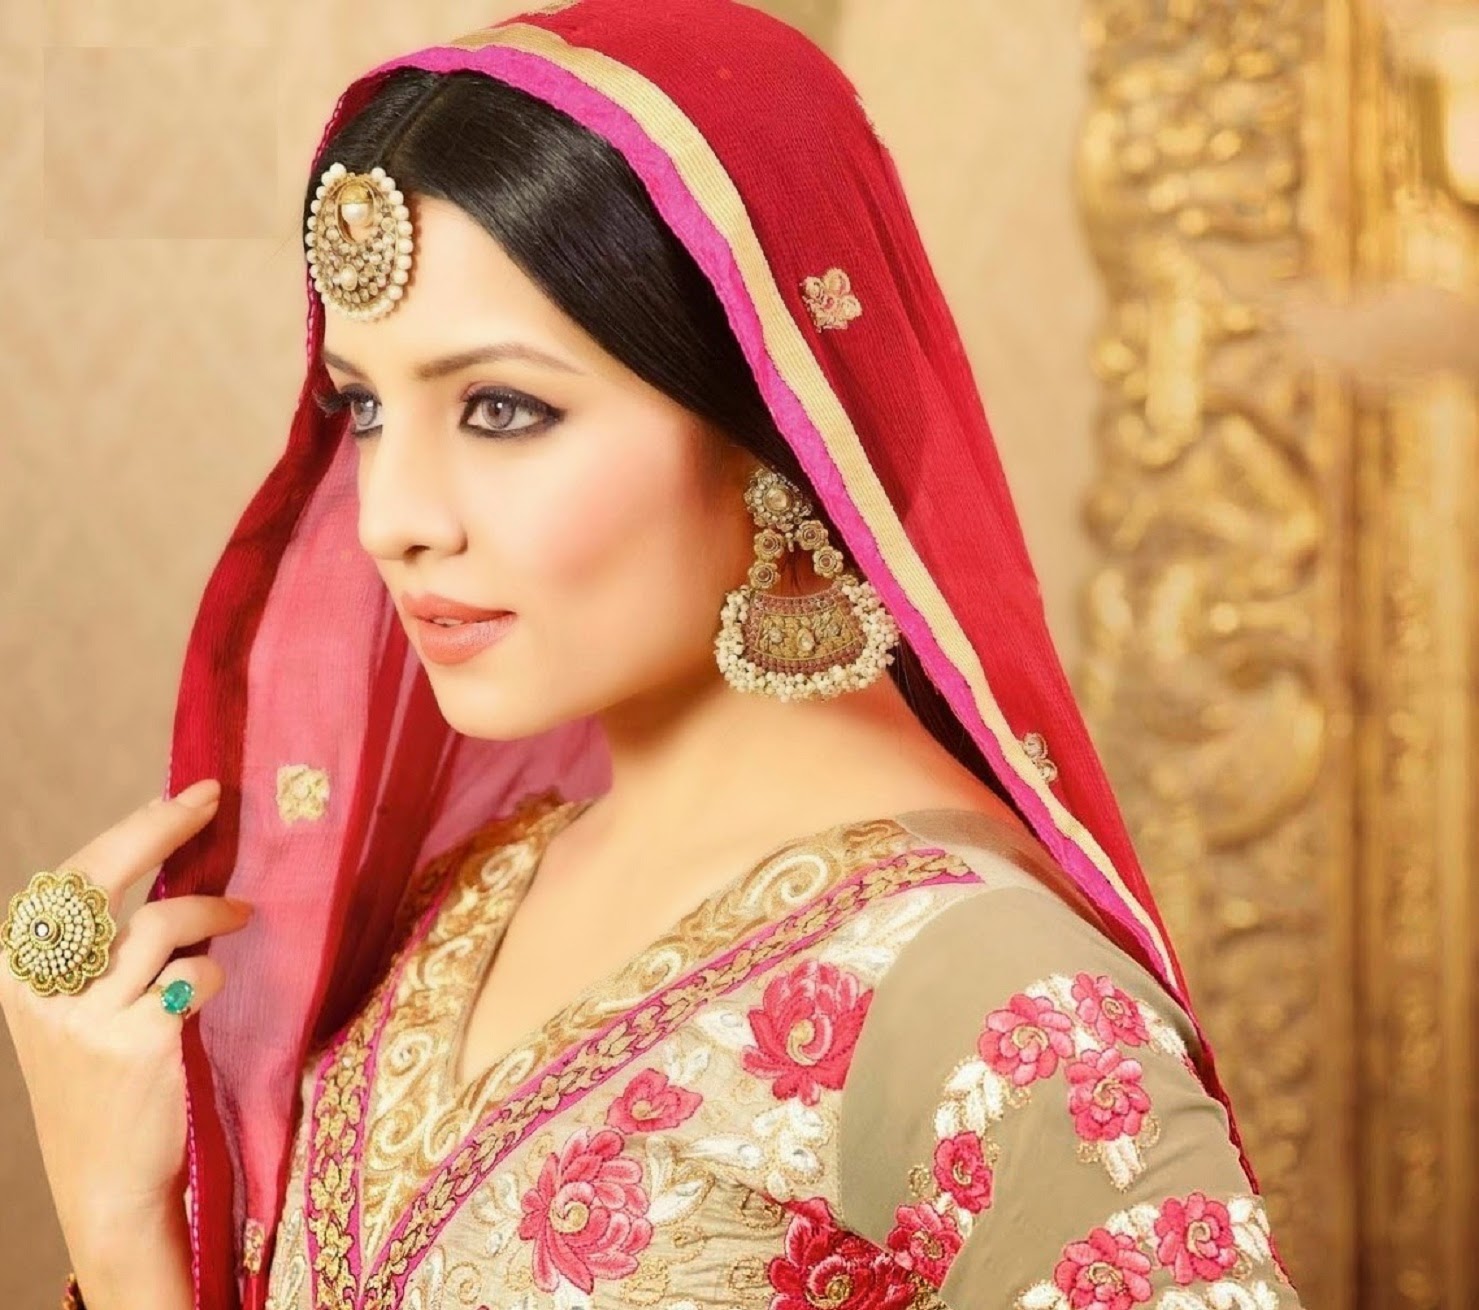 Cute Celina Jaitly Fantastic Side Look Mobile Hd Download Free Background Pictures